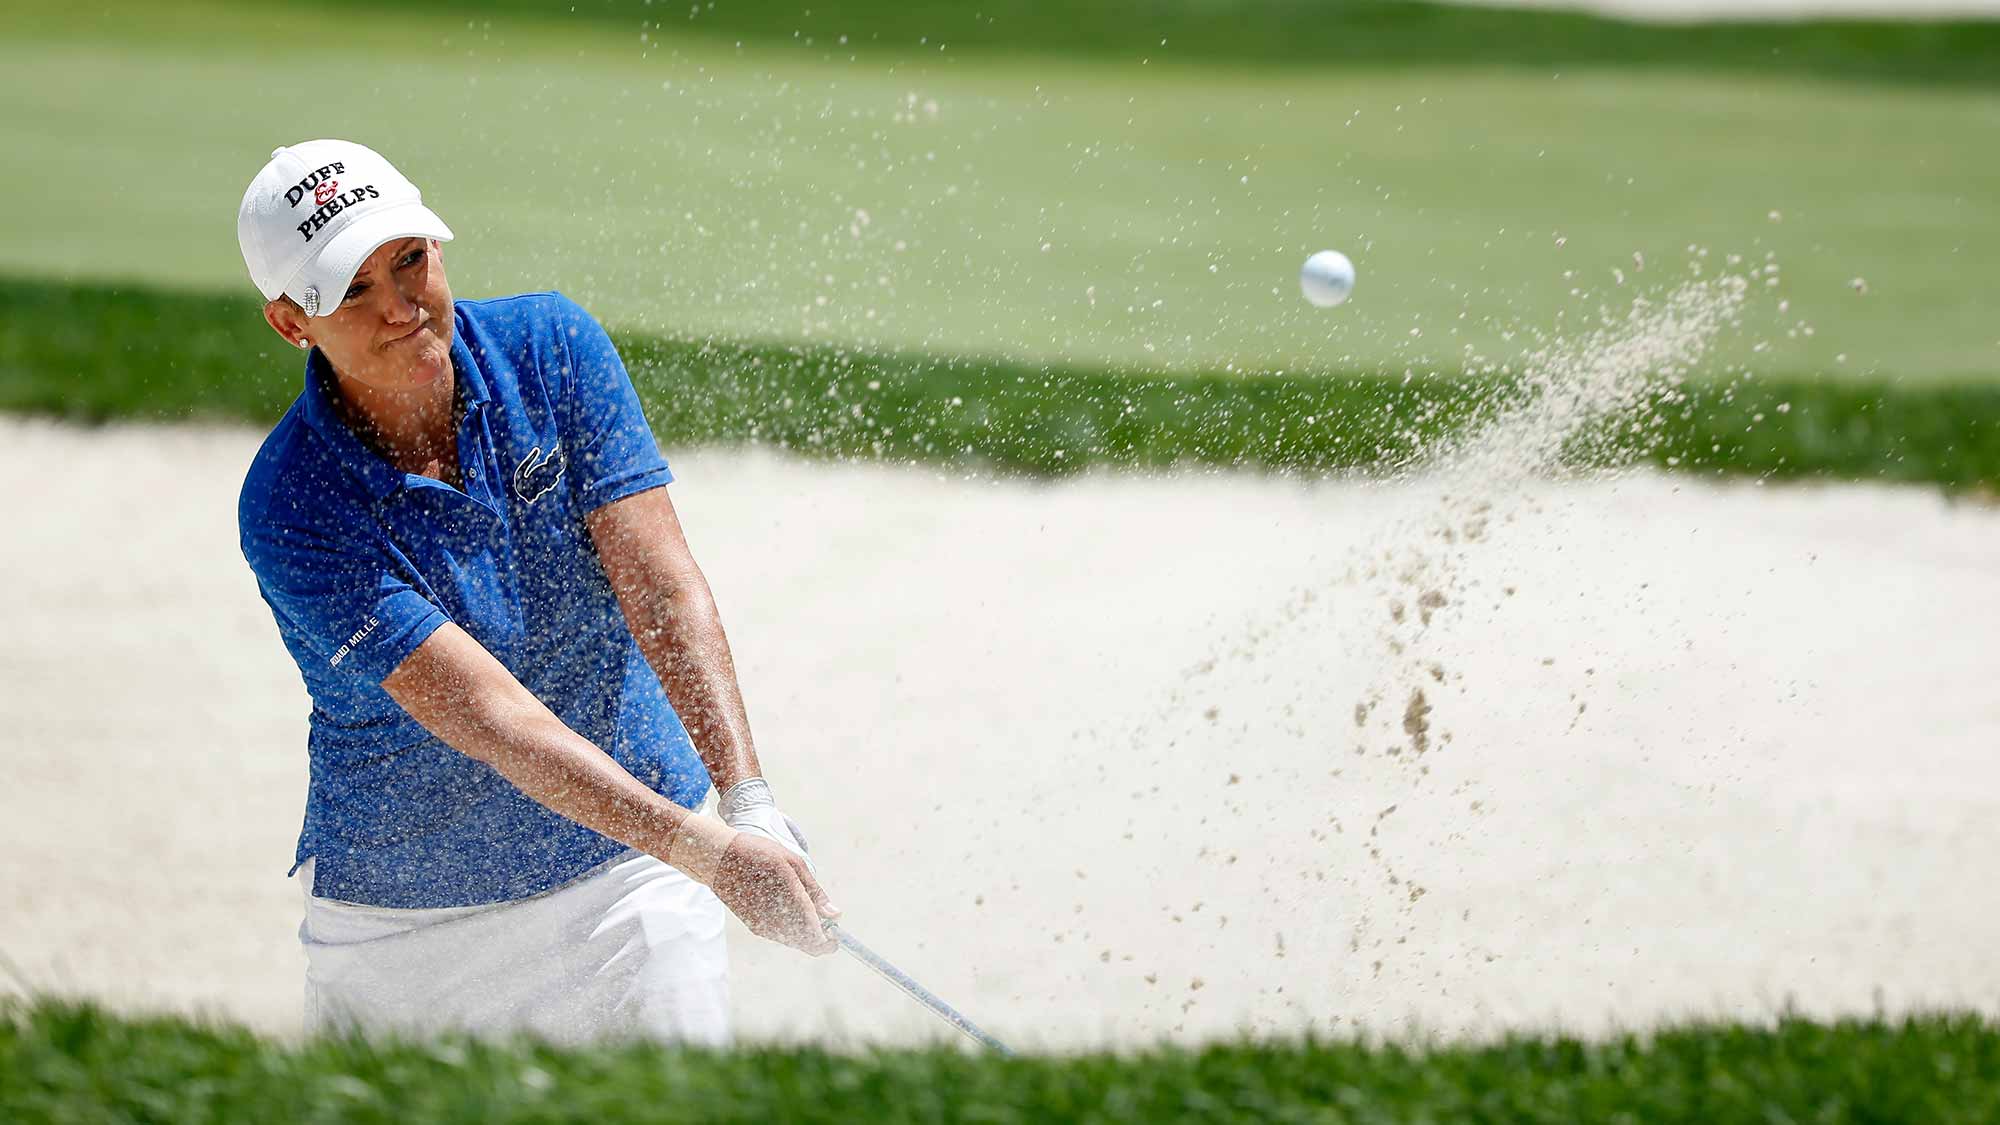 Cristie Kerr of the United States hits a bunker shot on the 16th hole during the second round of the U.S. Women's Open at Lancaster Country Club